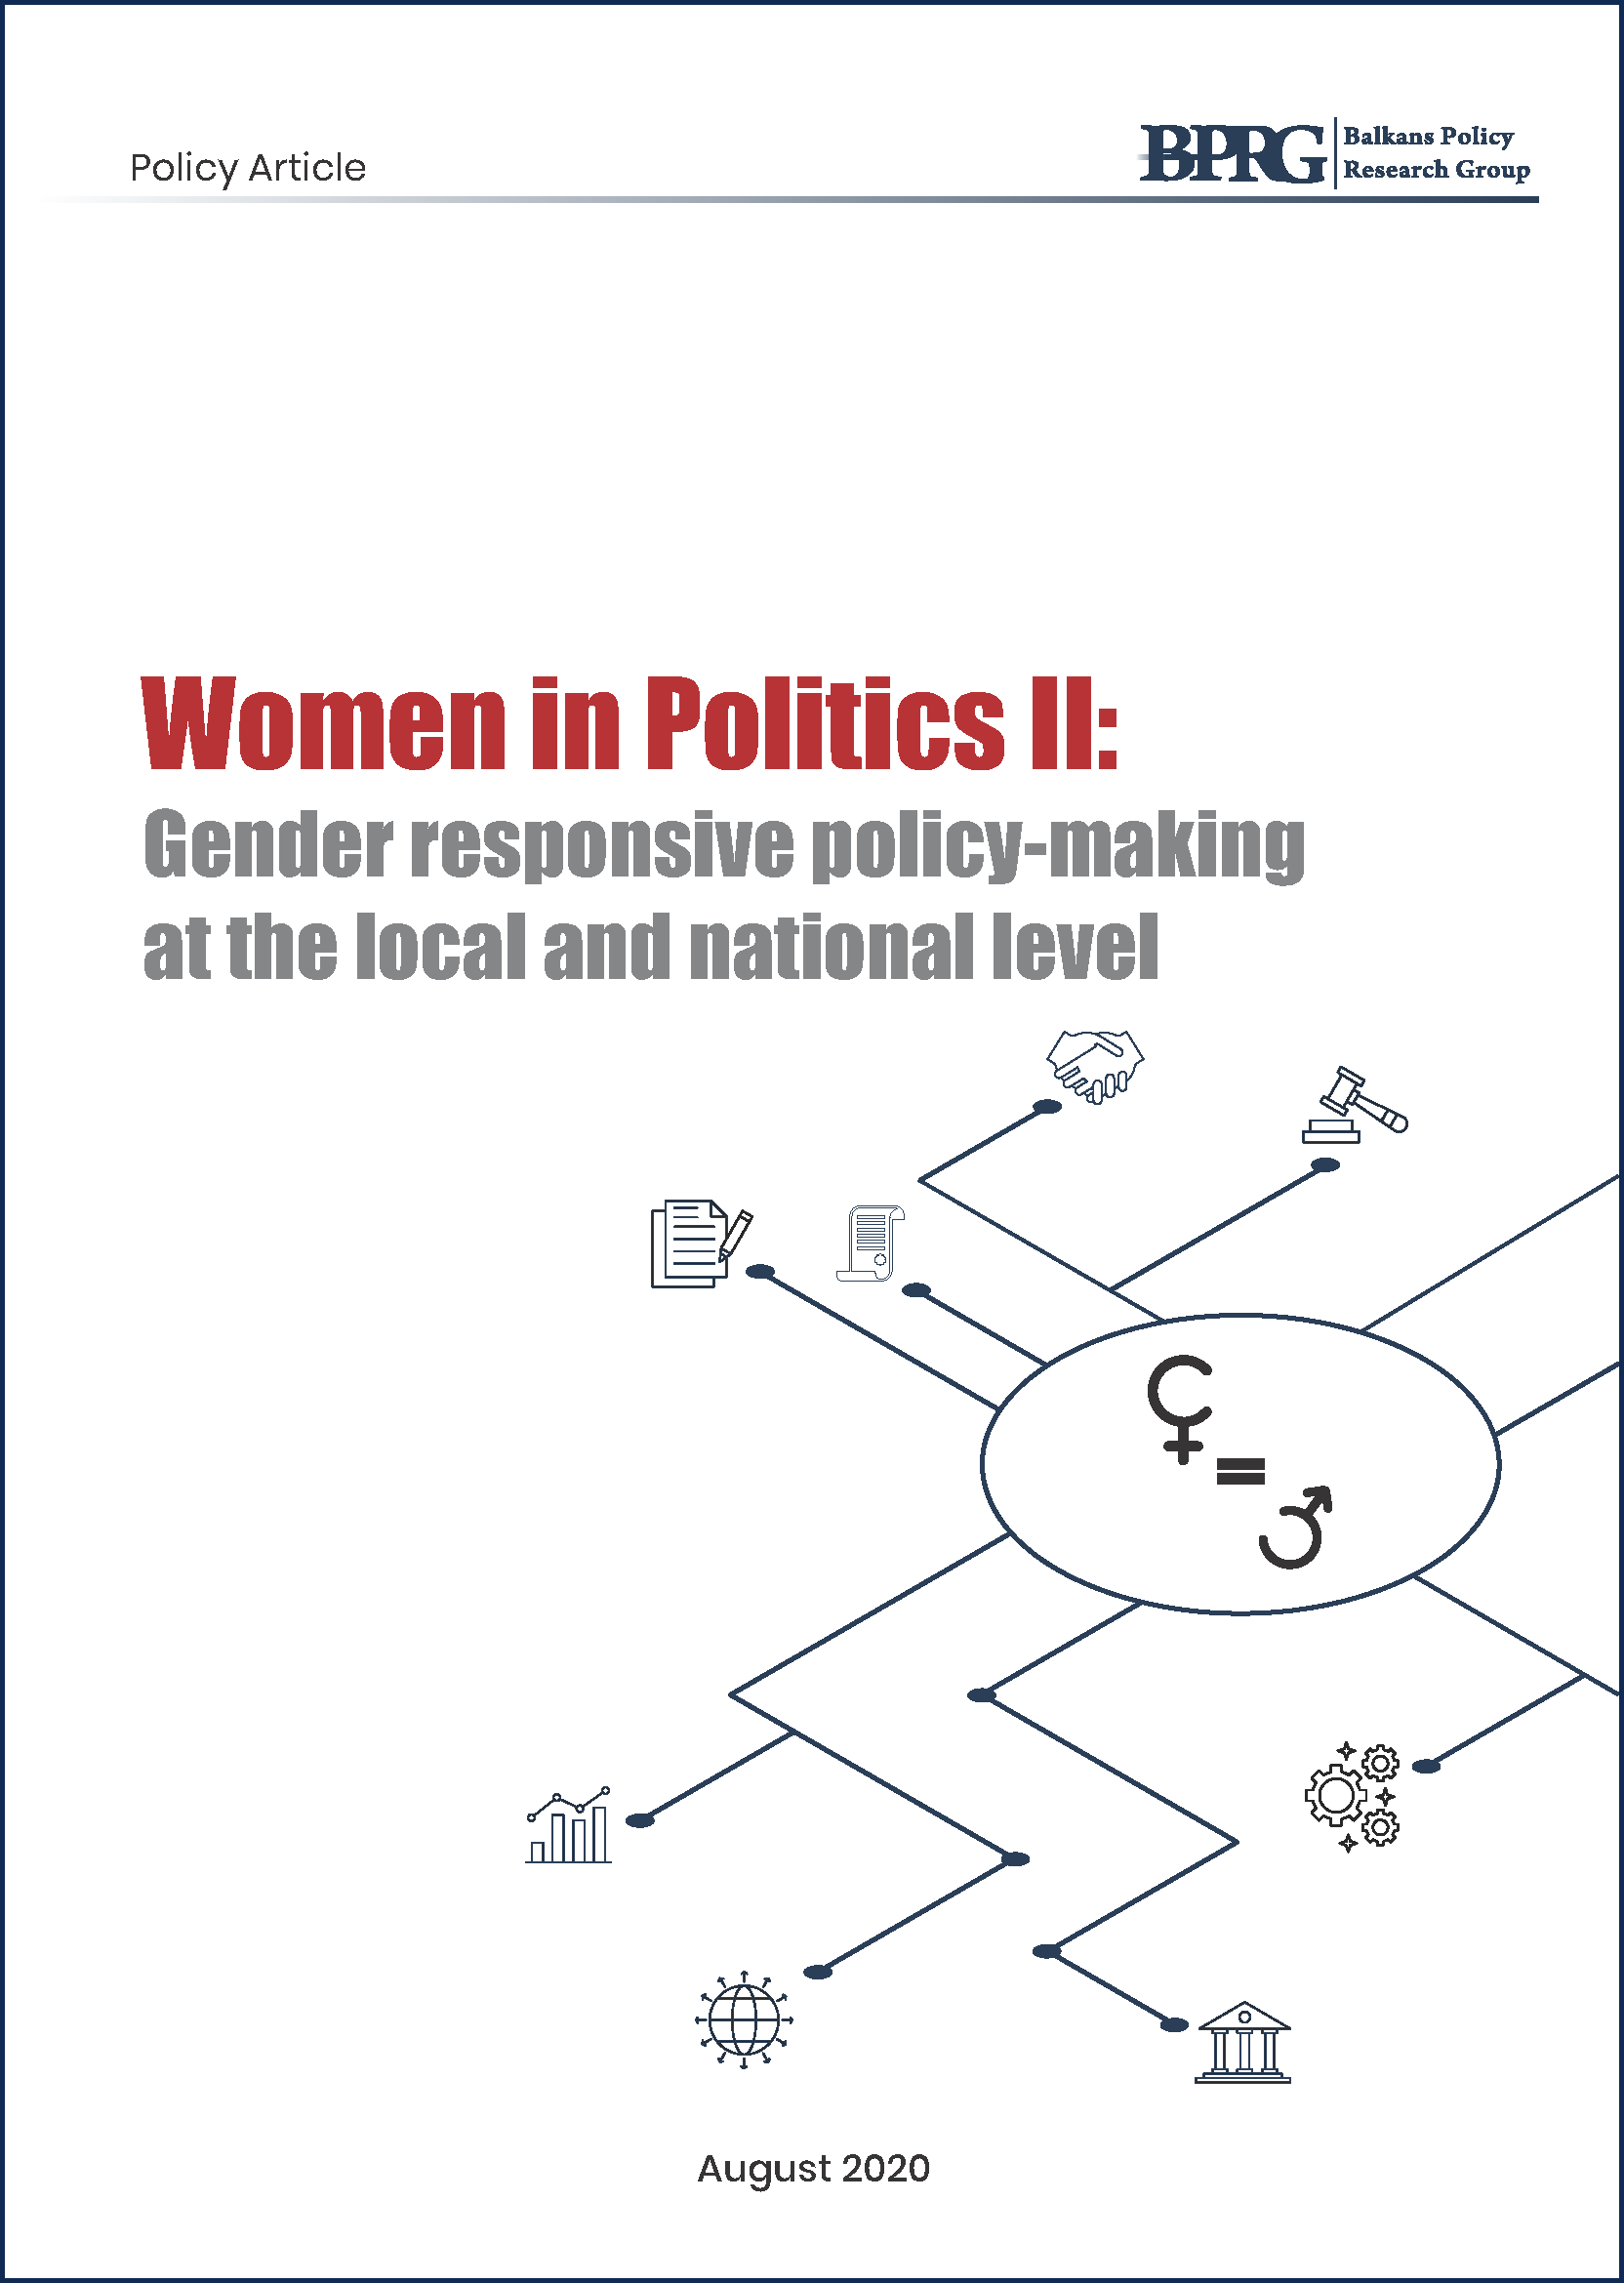 Women in Politics II: Gender Responsive Policy-Making at the Local and National Level